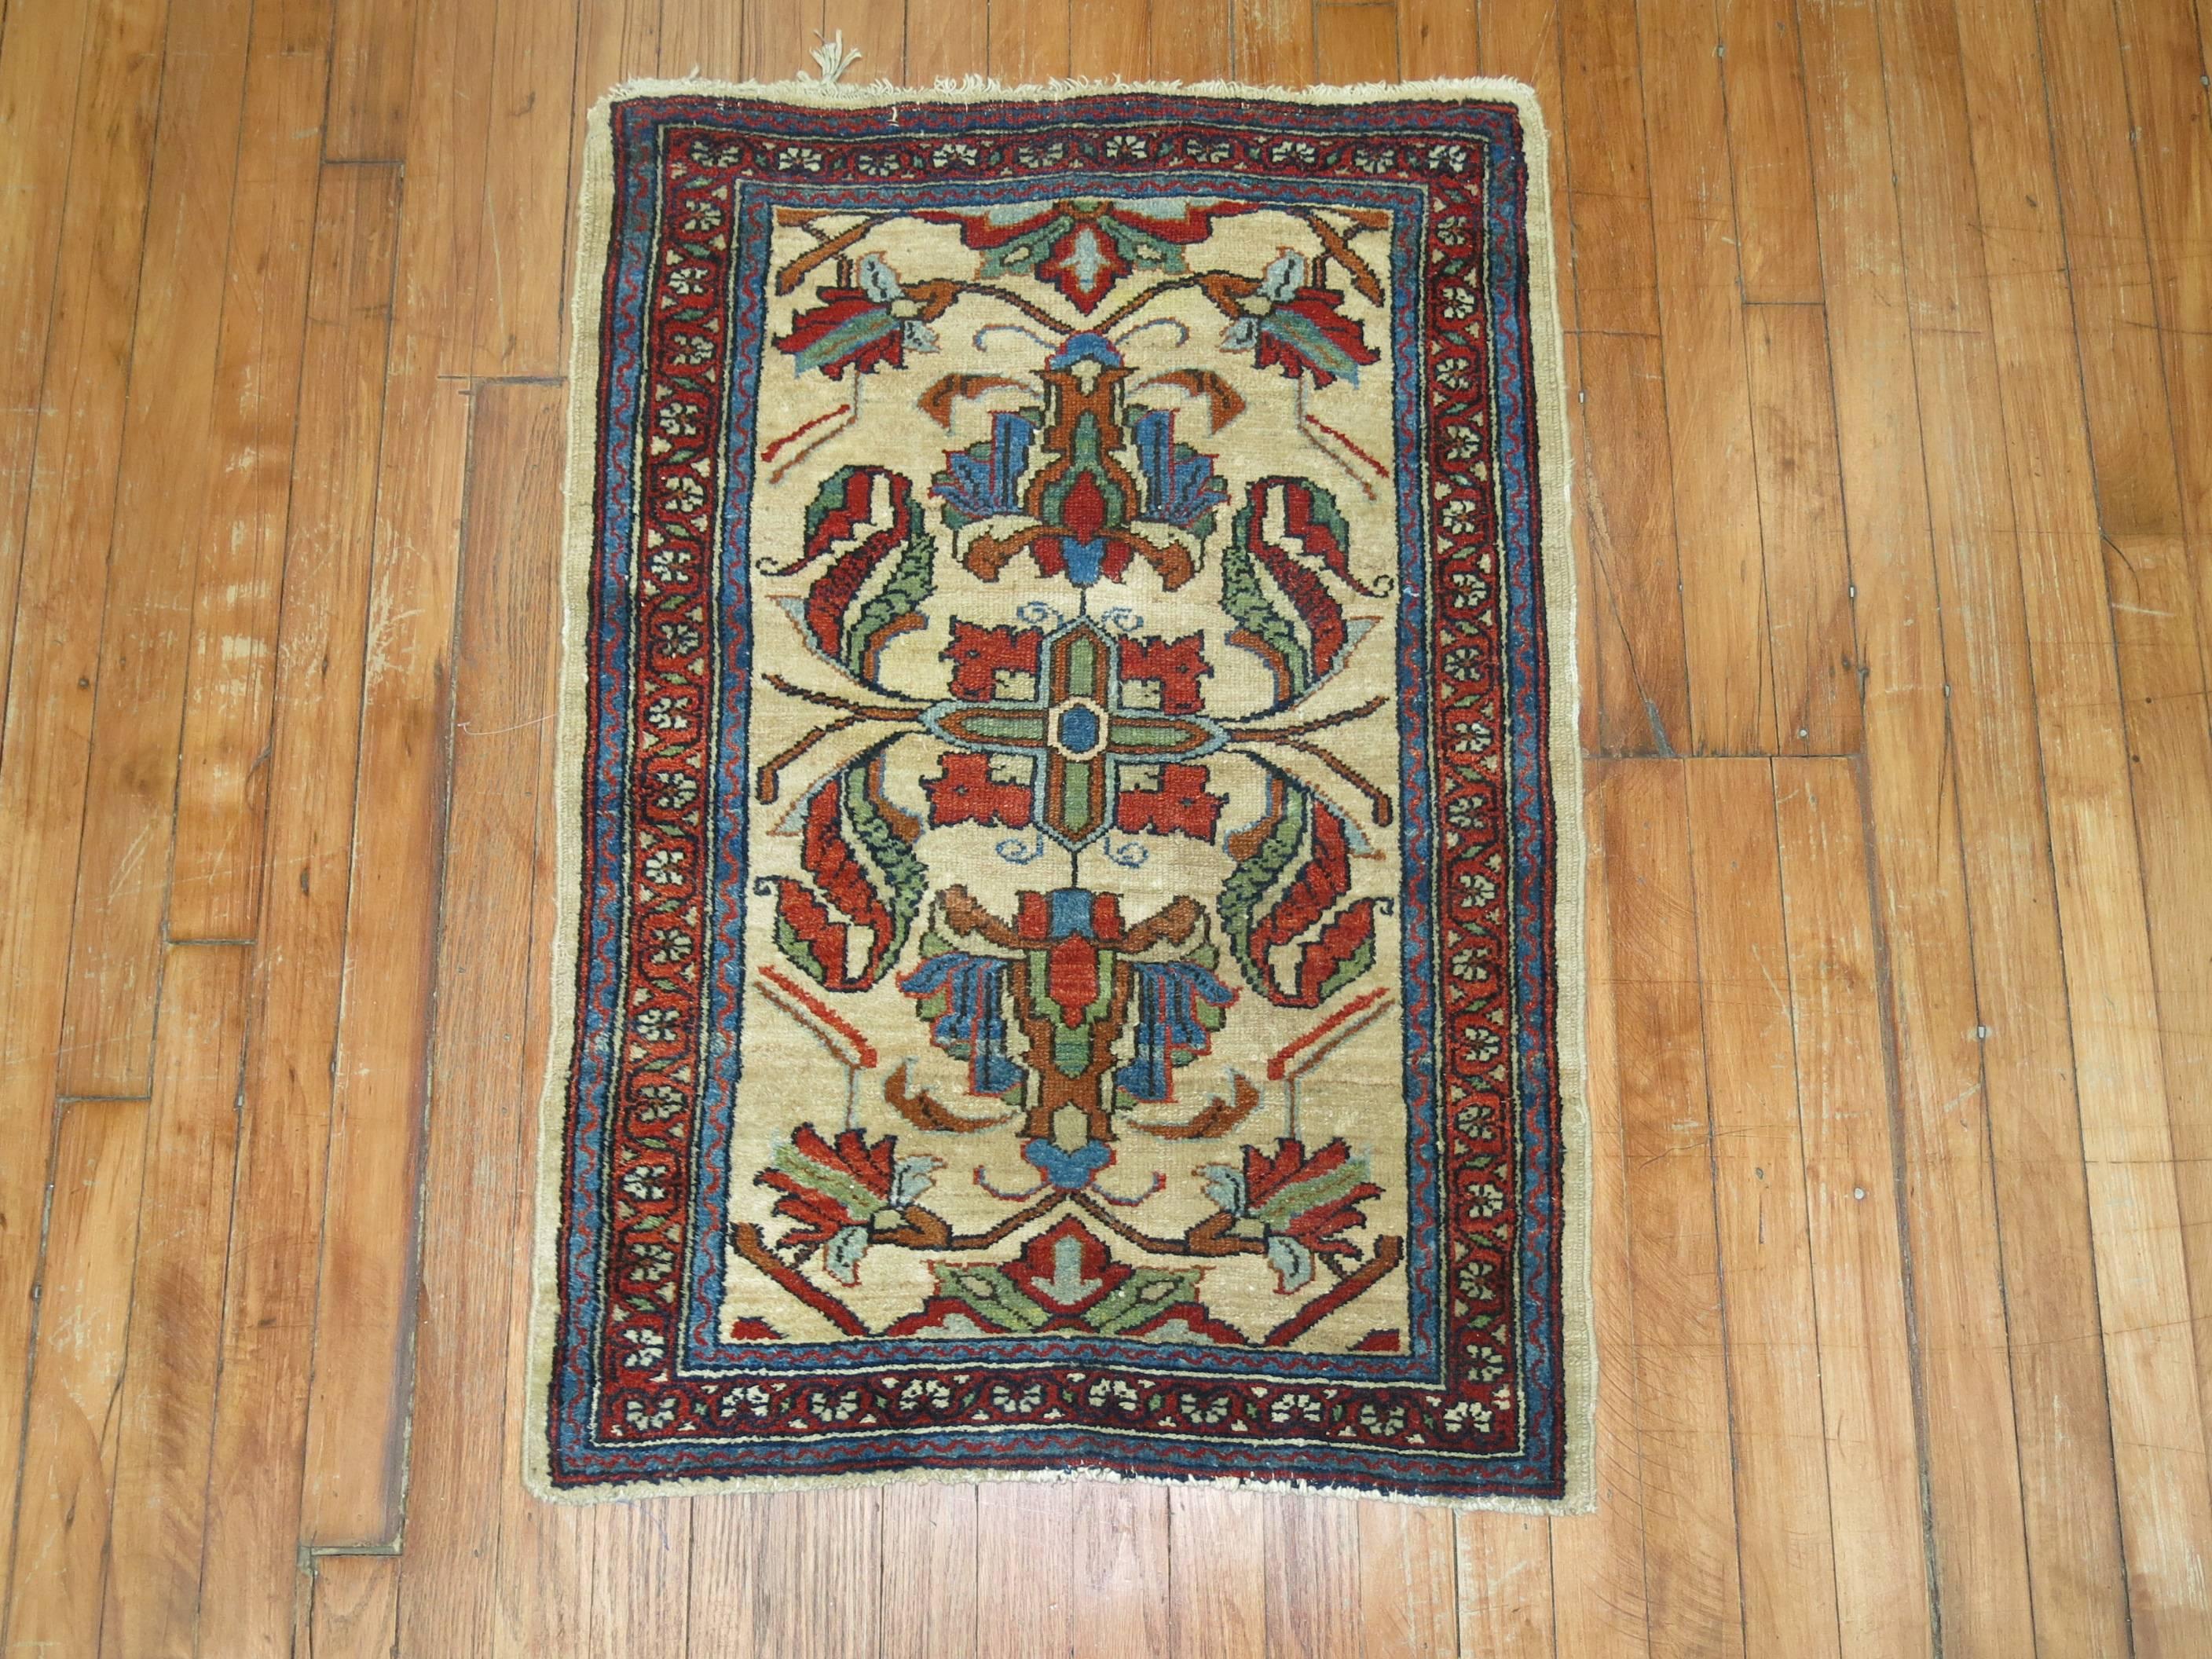 An early 20th century finely decorative Persian rug. Ivory bone field, accents in red rust and green,

circa 1910, measures: 2'3